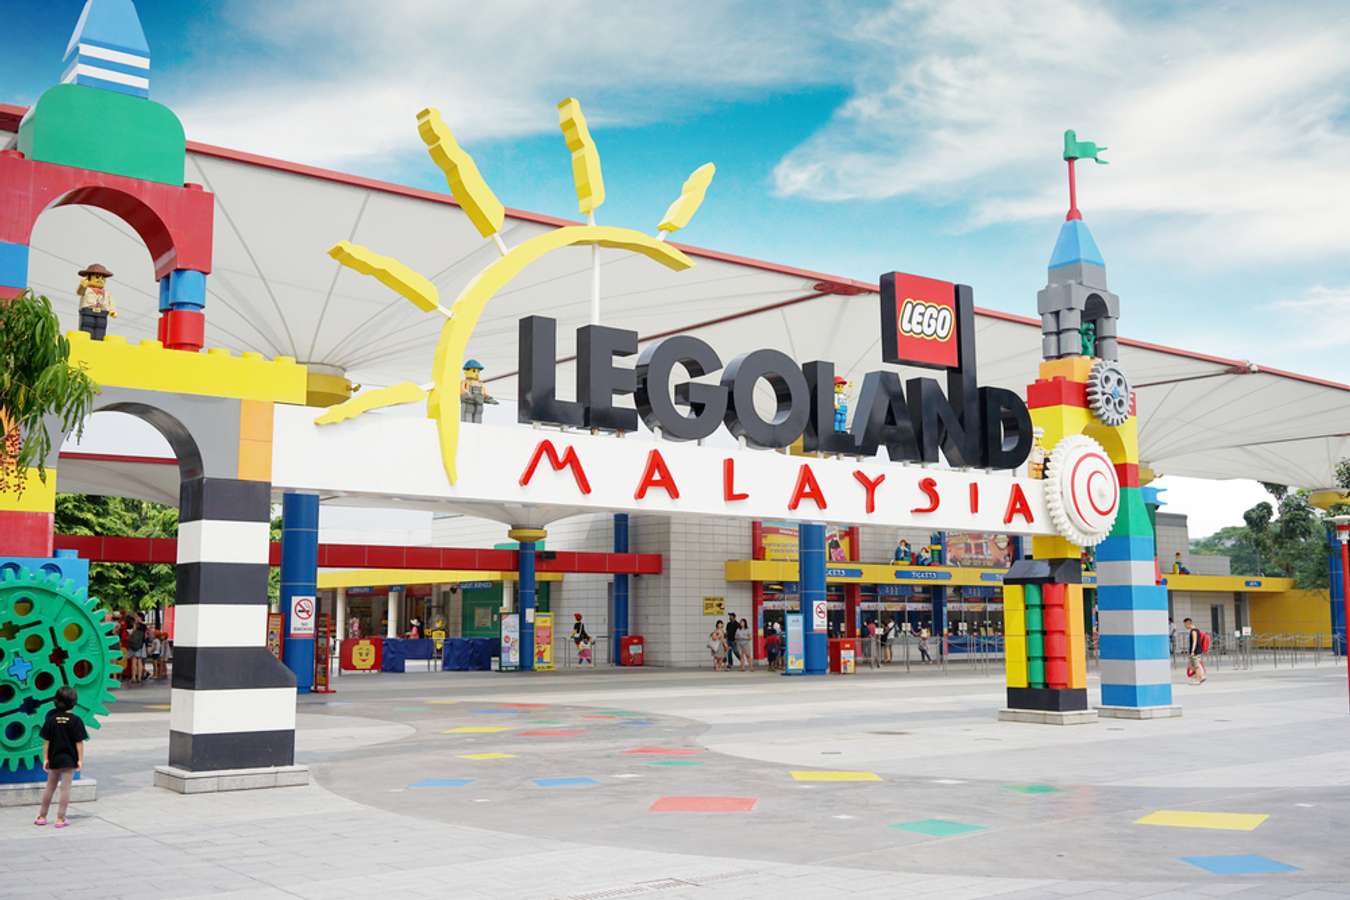 Go to Legoland Malaysia - Things to do in JB